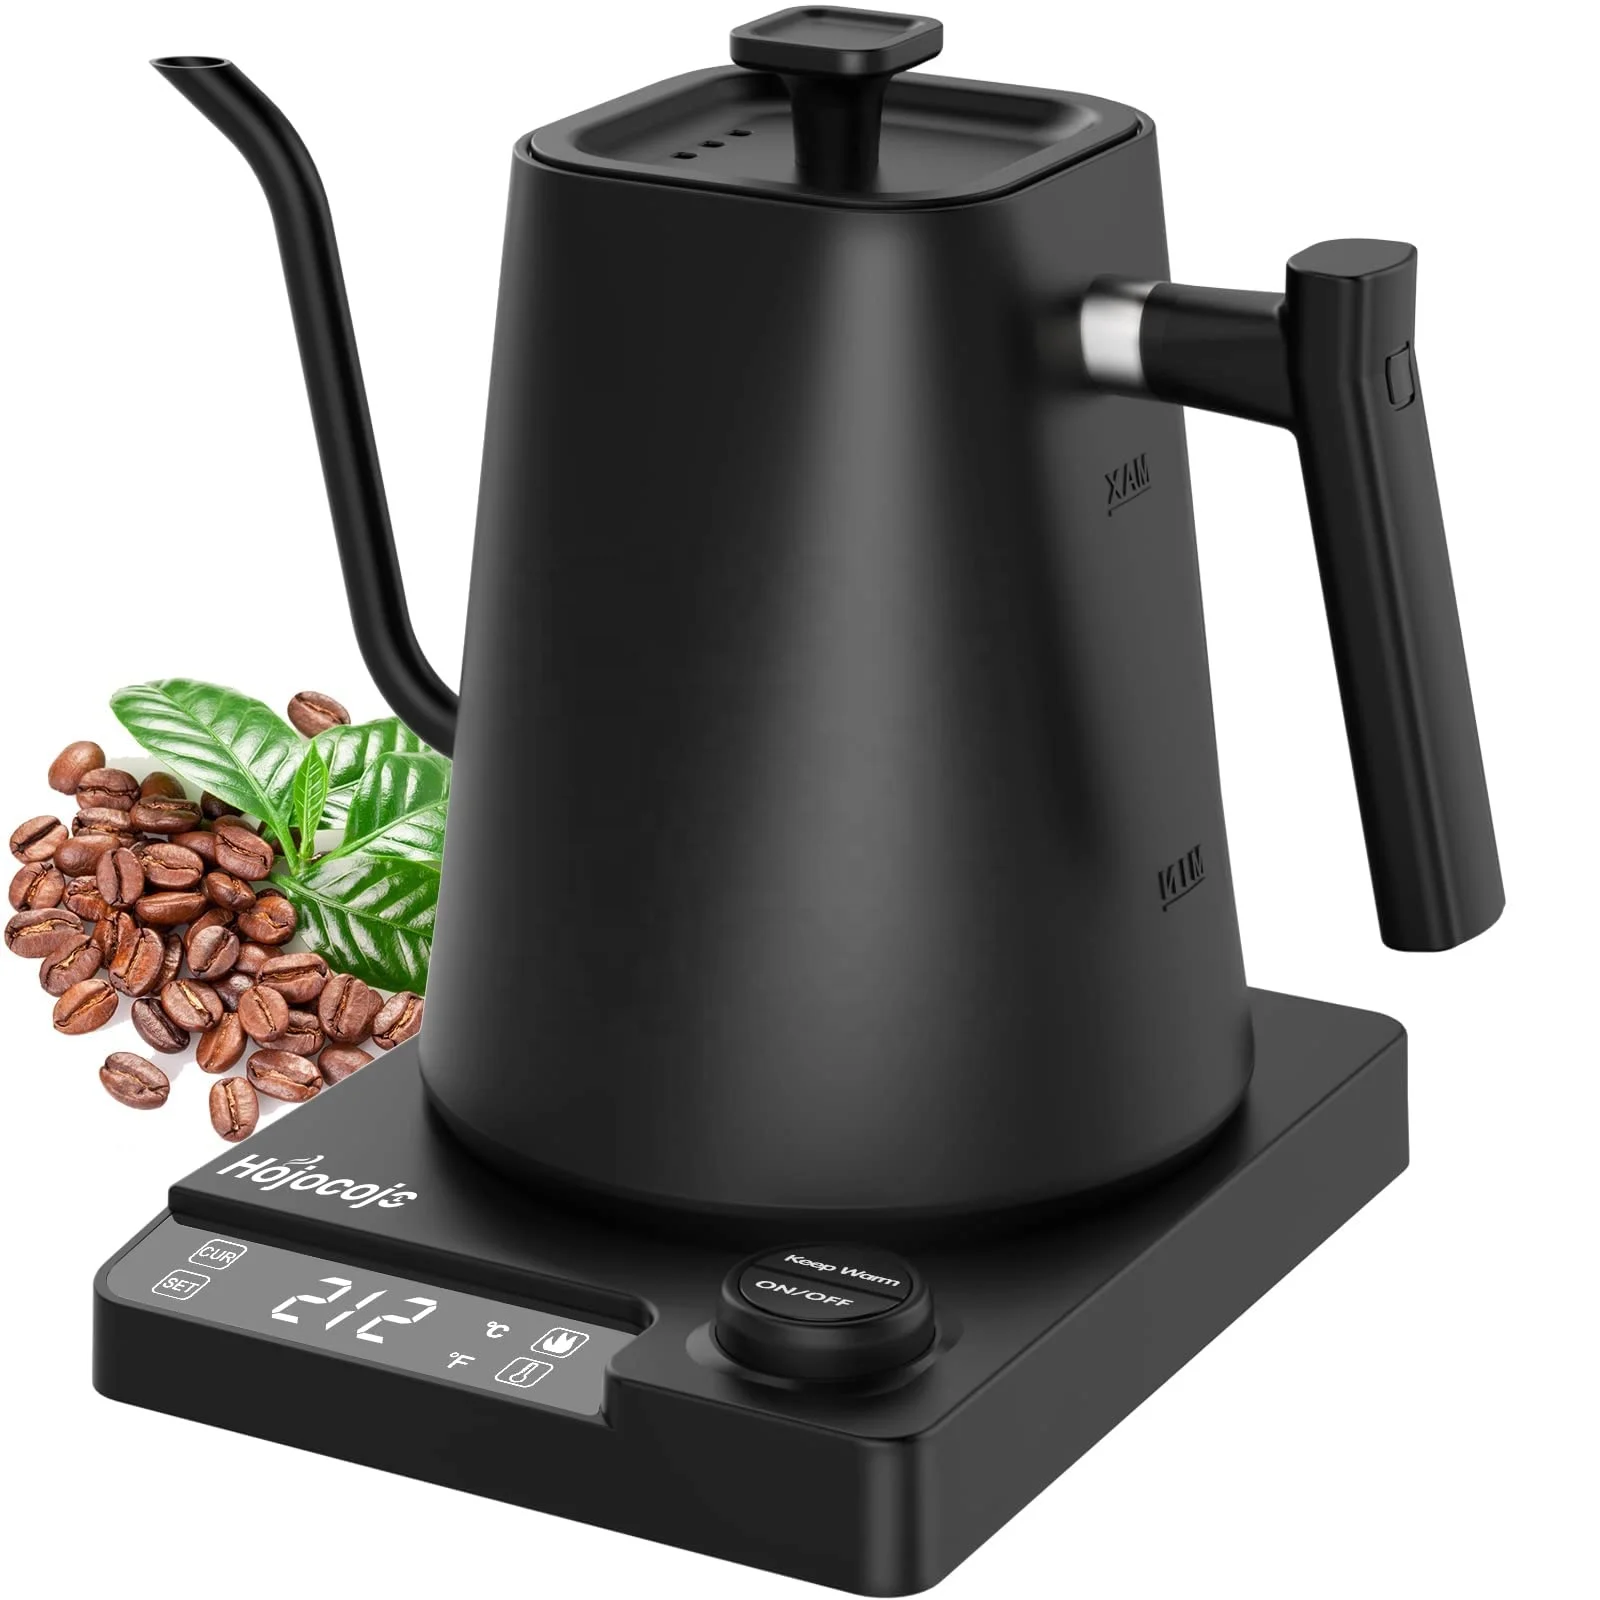  Gooseneck Electric Kettle, 0.9L Electric Tea Kettle with  Temperature Control & Holding, 1200w Fast Boiling Hot Water Kettle,  Stainless Steel Pour-Over Kettle for Coffee & Tea, Auto Shut off: Home 